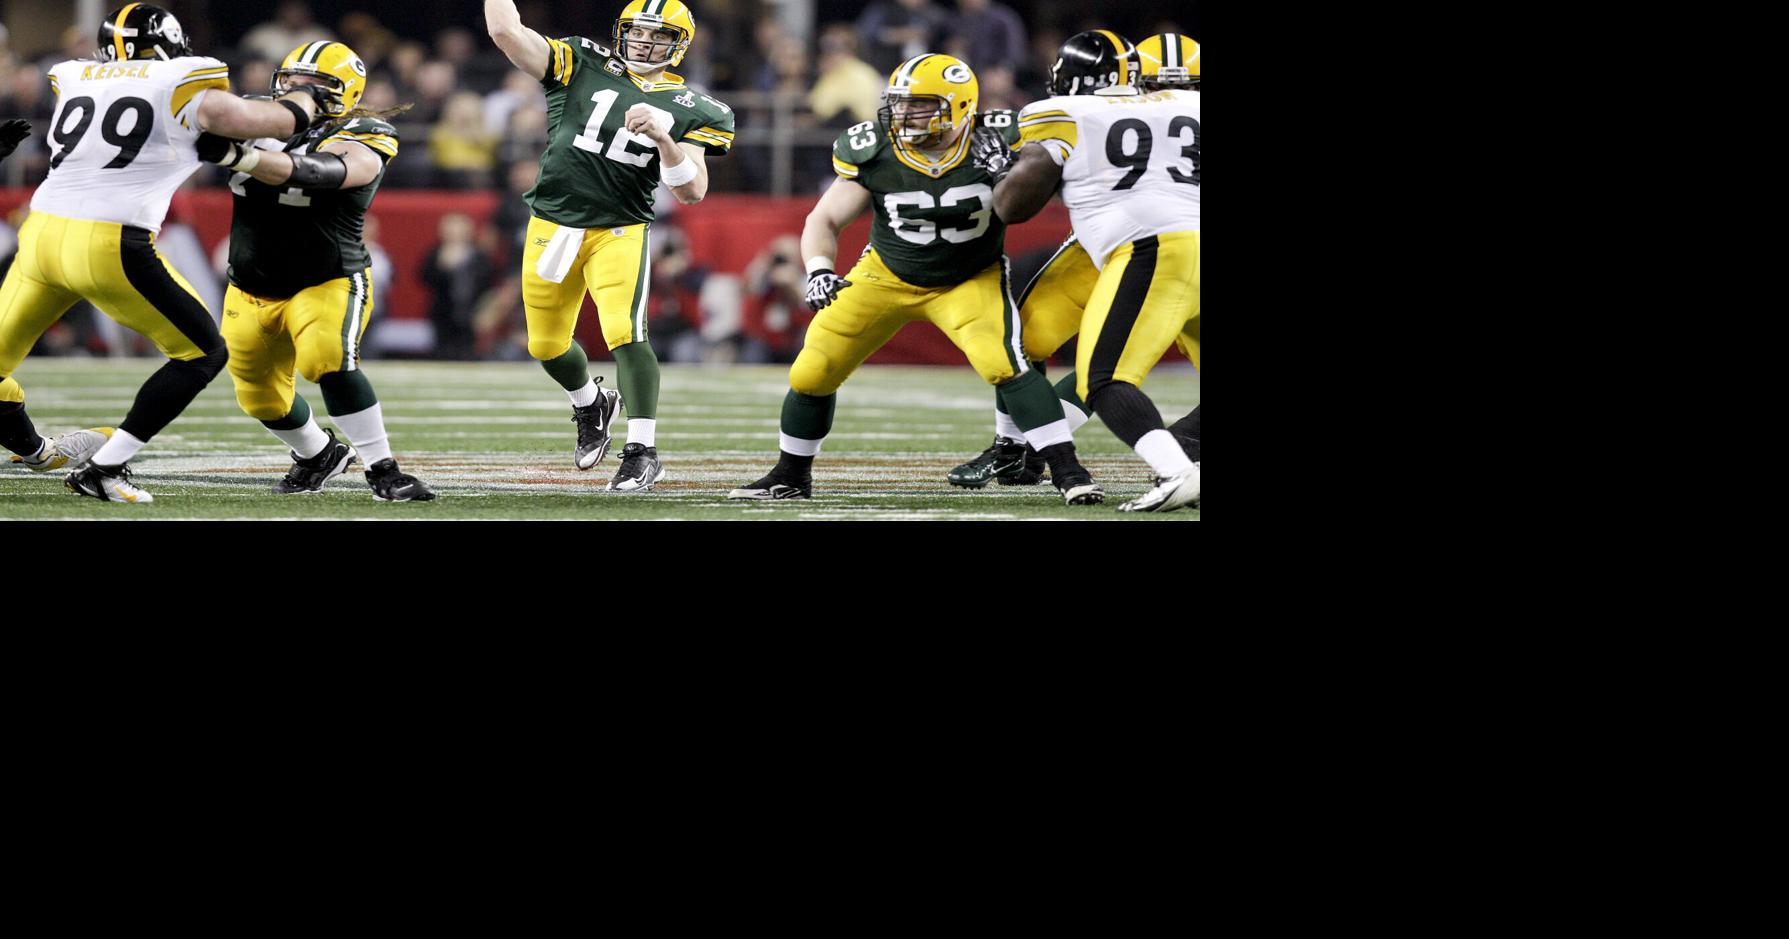 23: Aaron Rodgers' Perfect Pass to Greg Jennings Super Bowl XLV